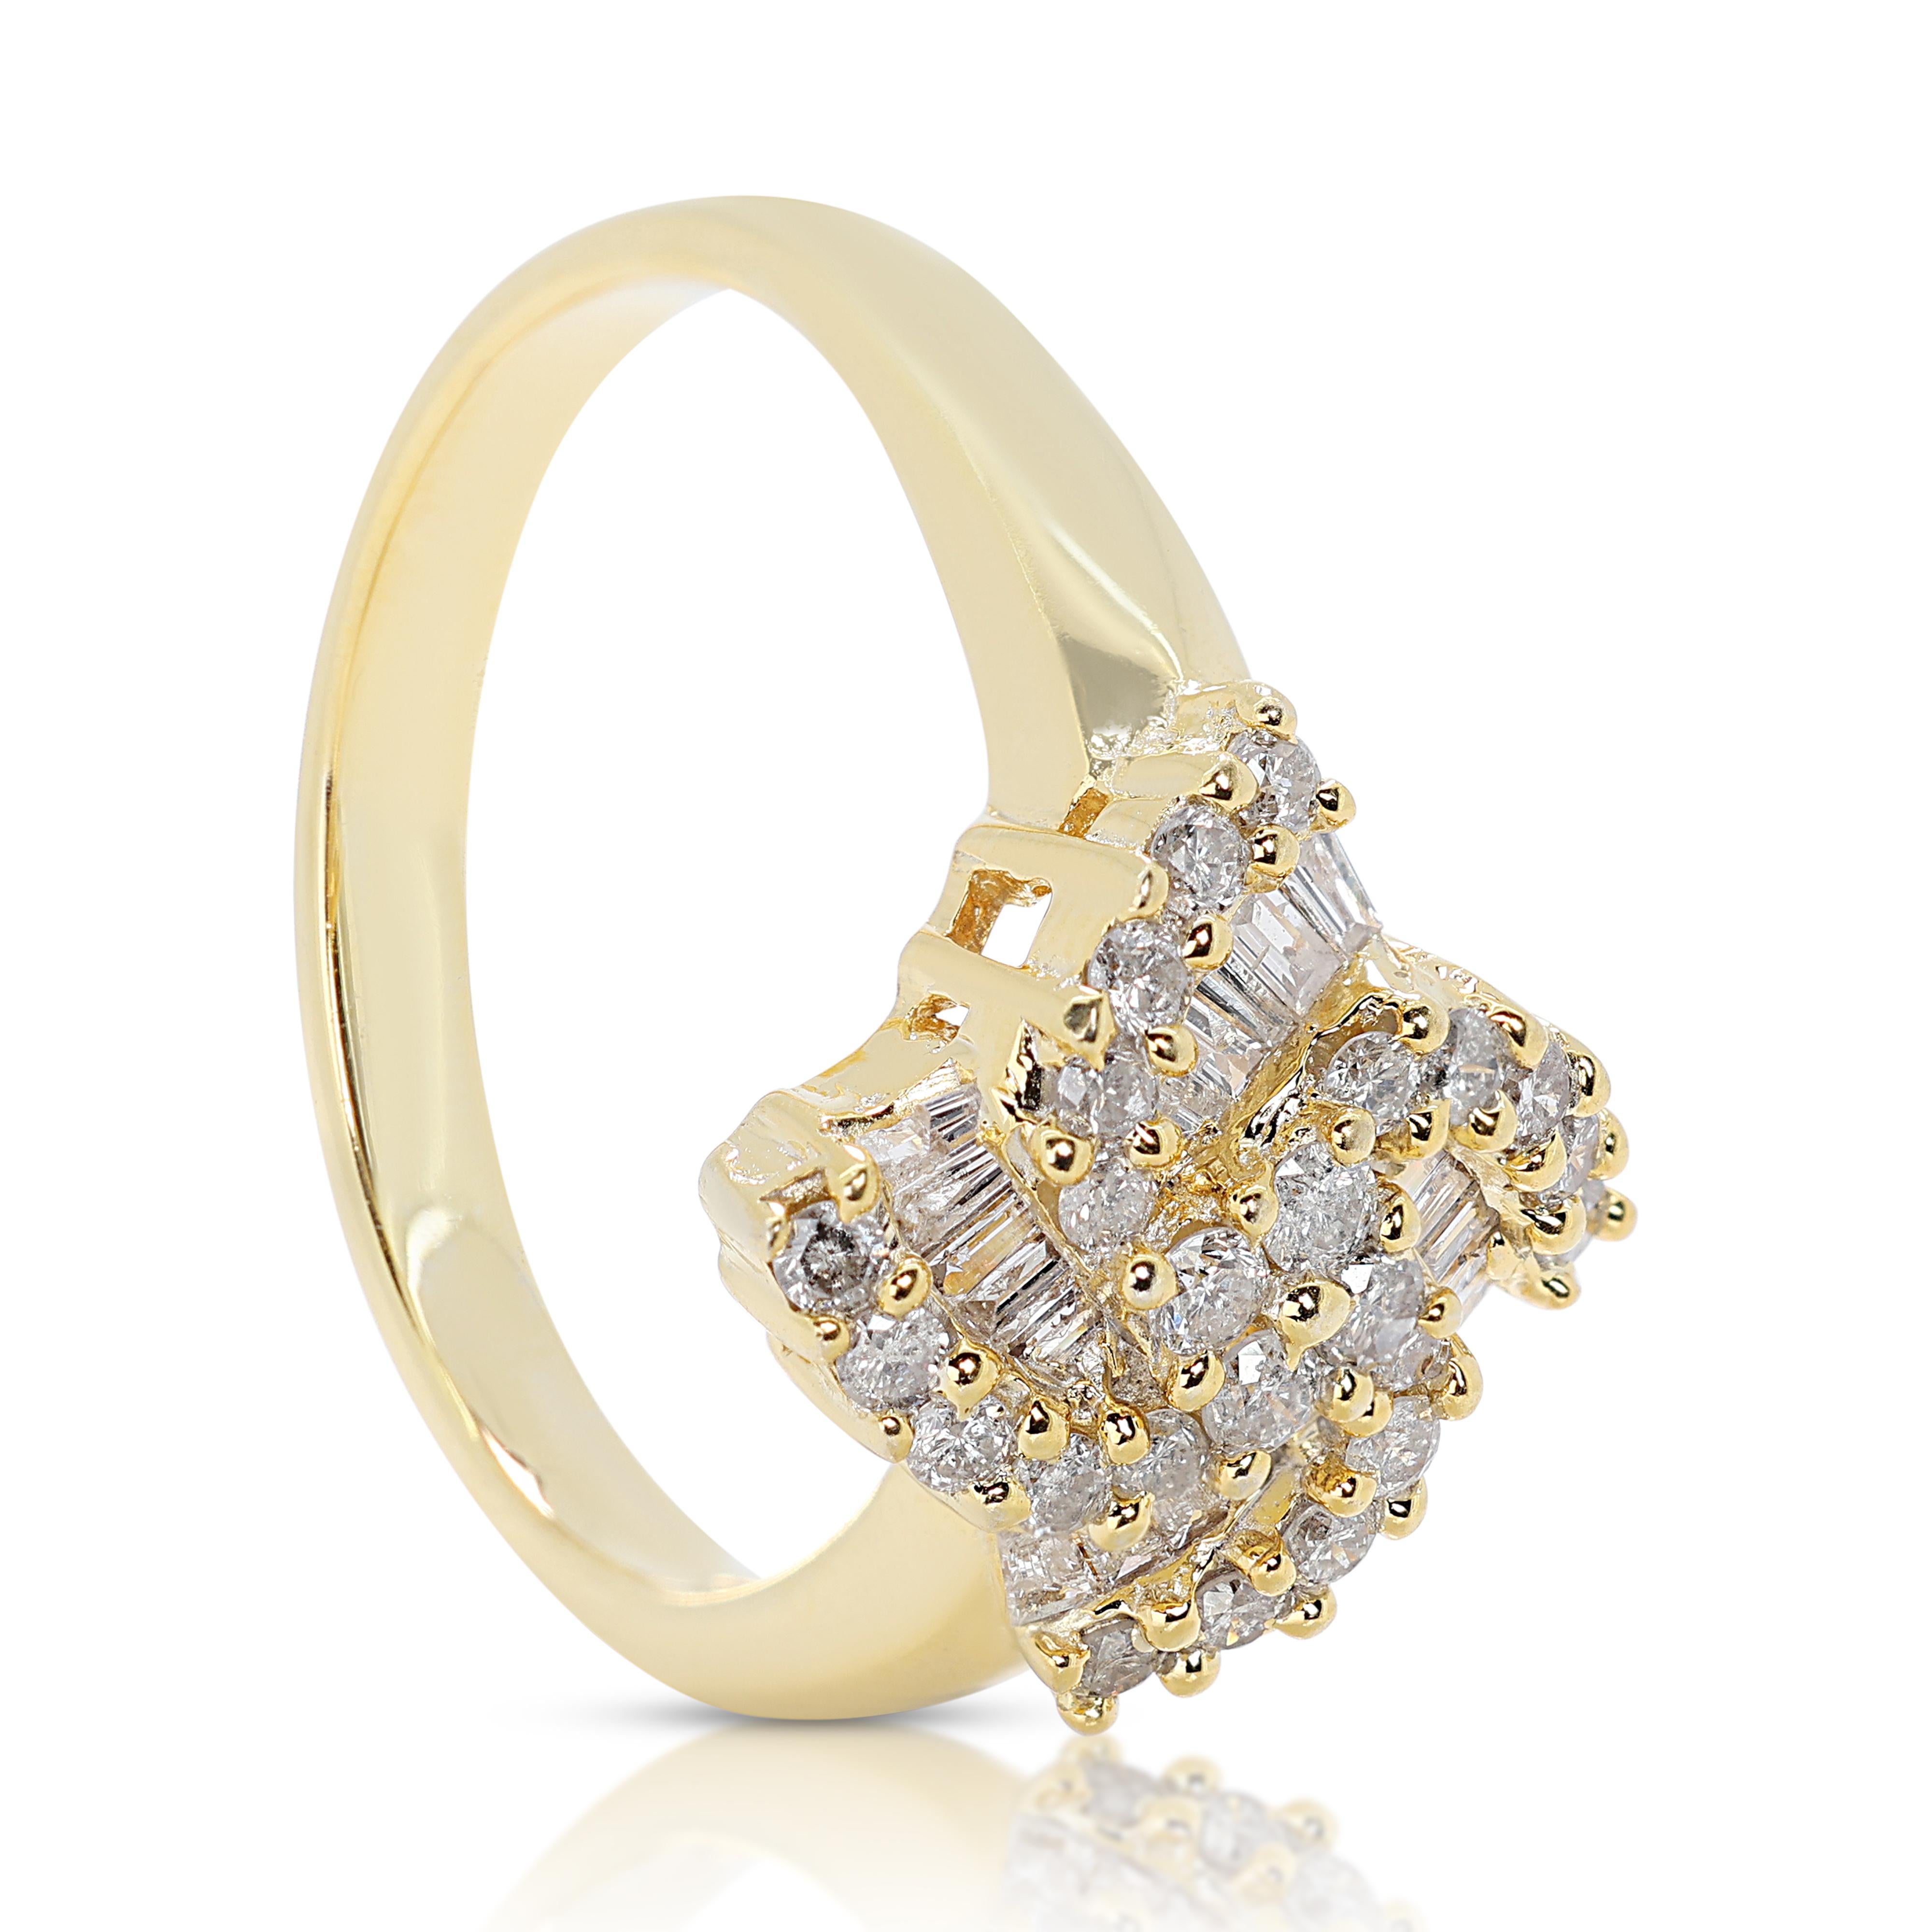 Brilliant 0.42ct Diamonds Cluster Ring in 18K Yellow Gold In Excellent Condition For Sale In רמת גן, IL